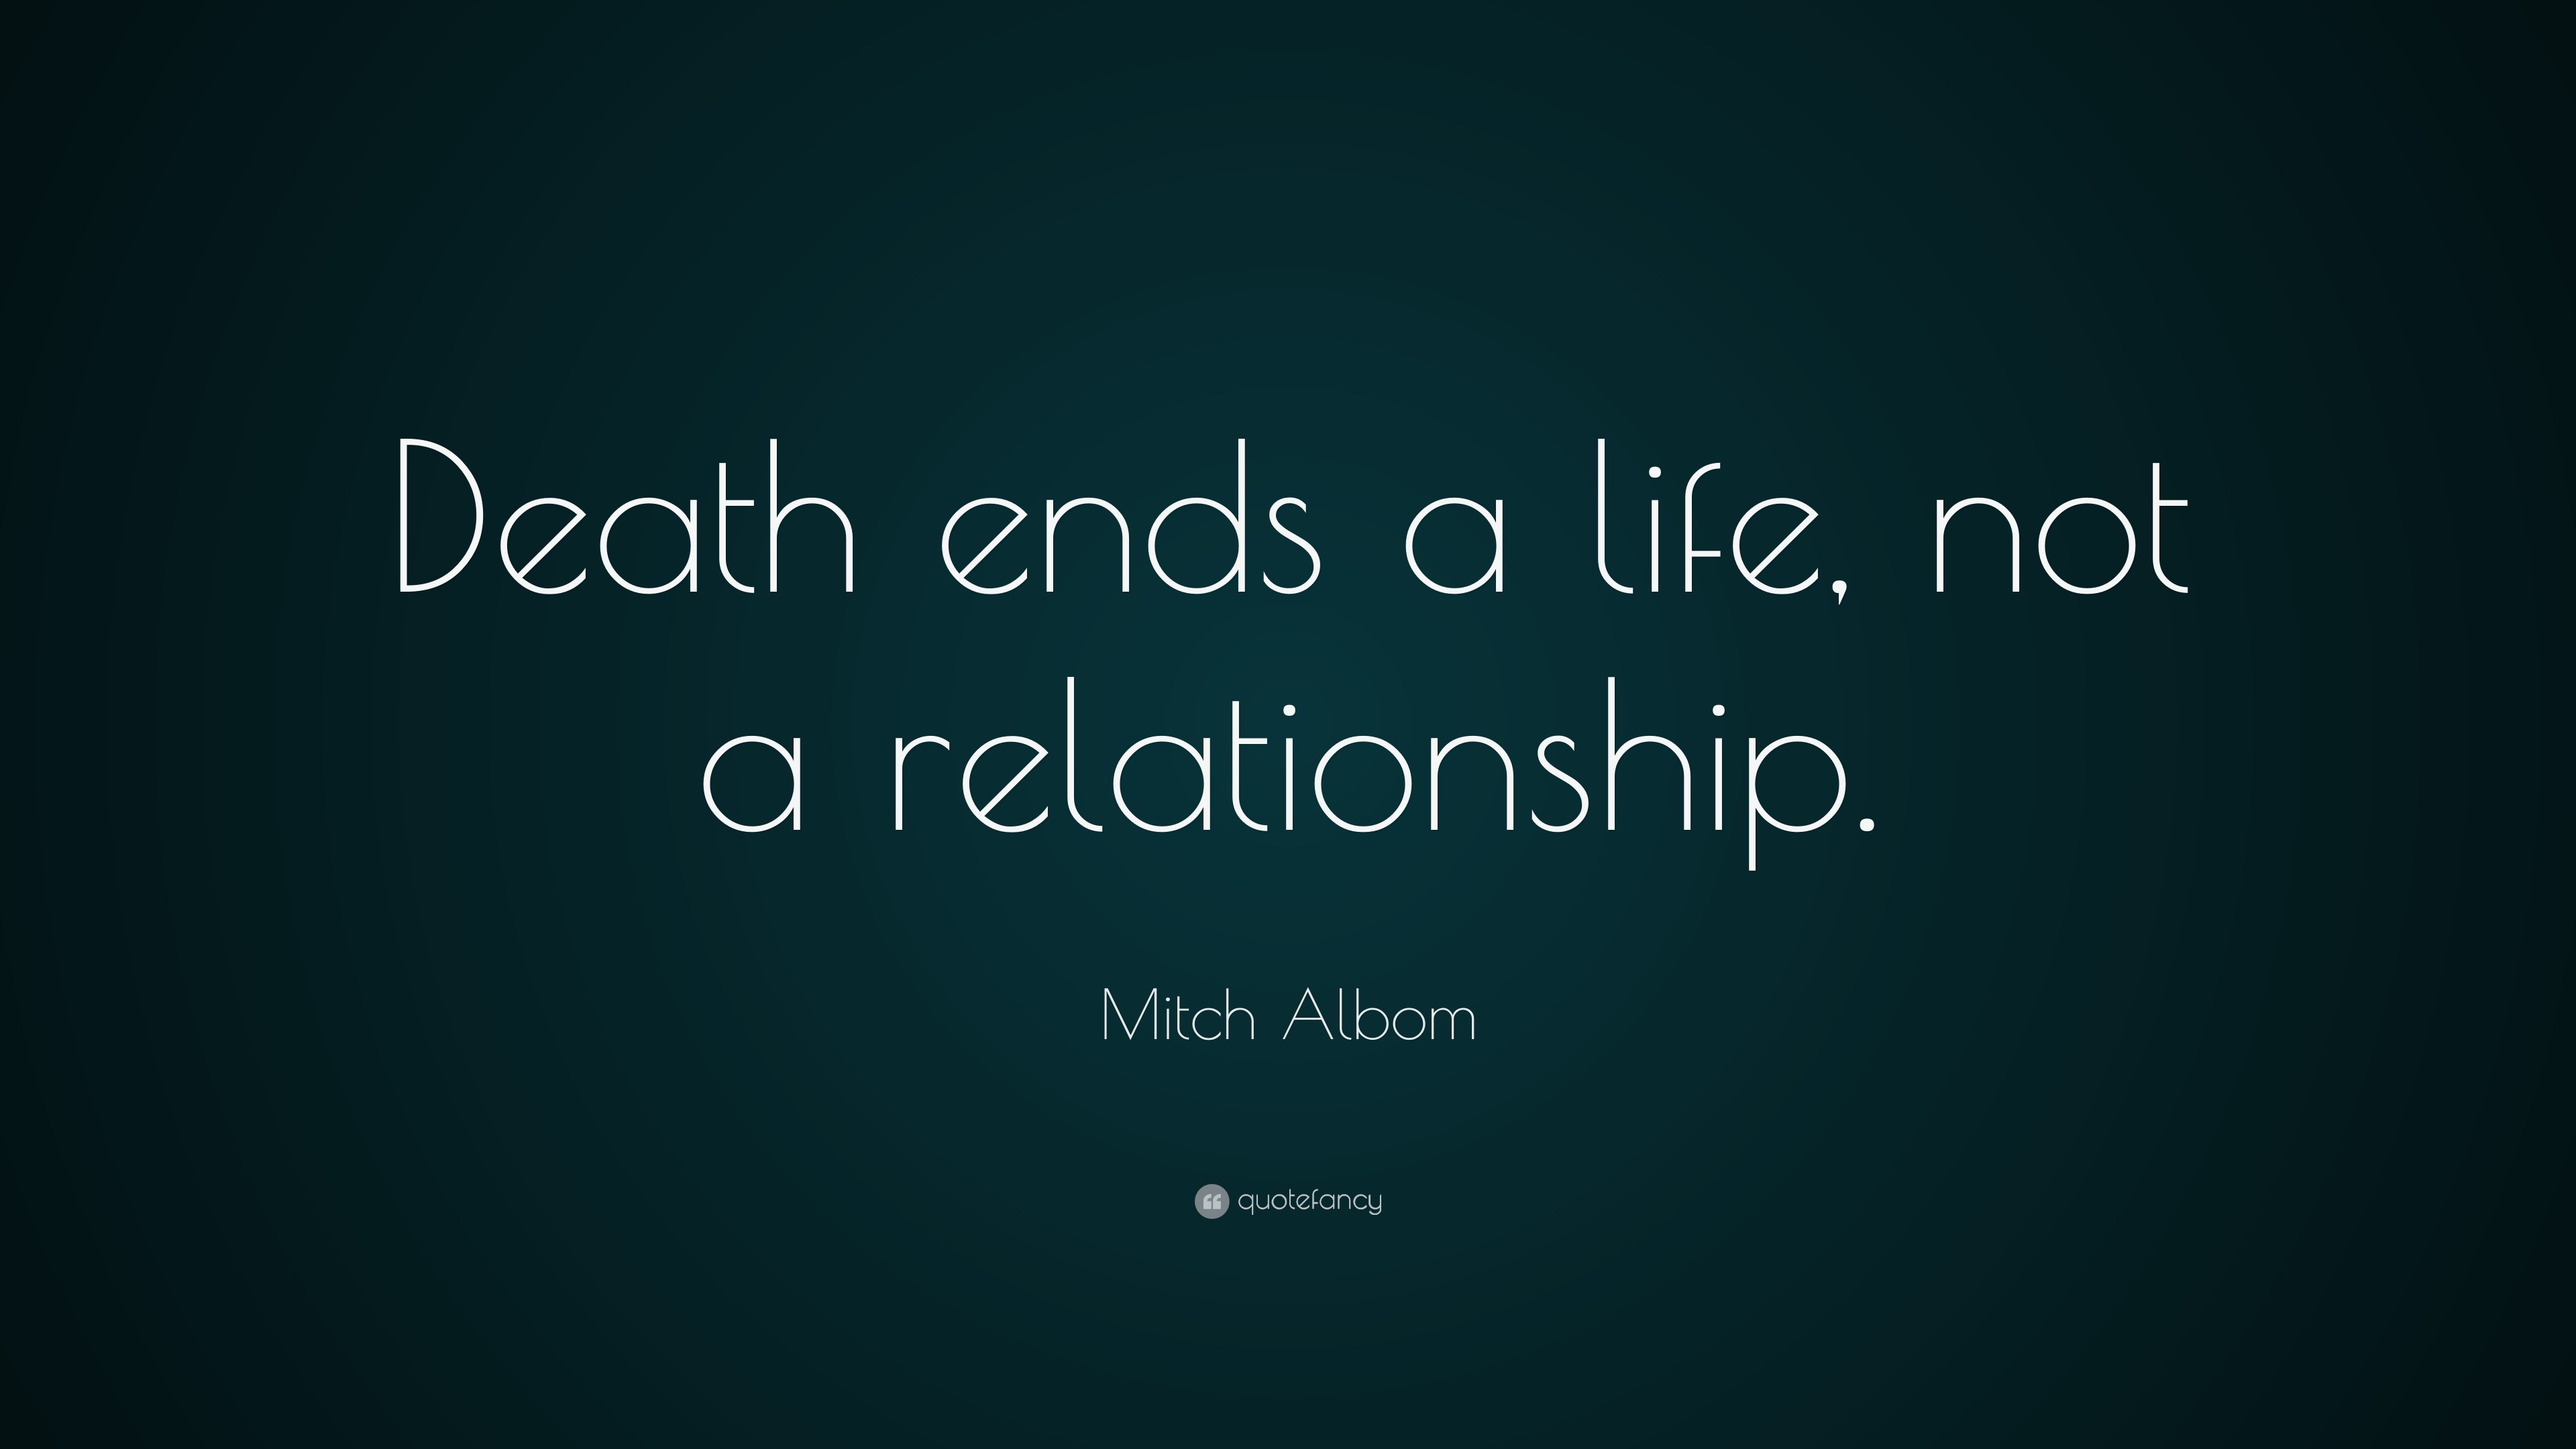 Mitch Albom Quote “Death ends a life not a relationship ”